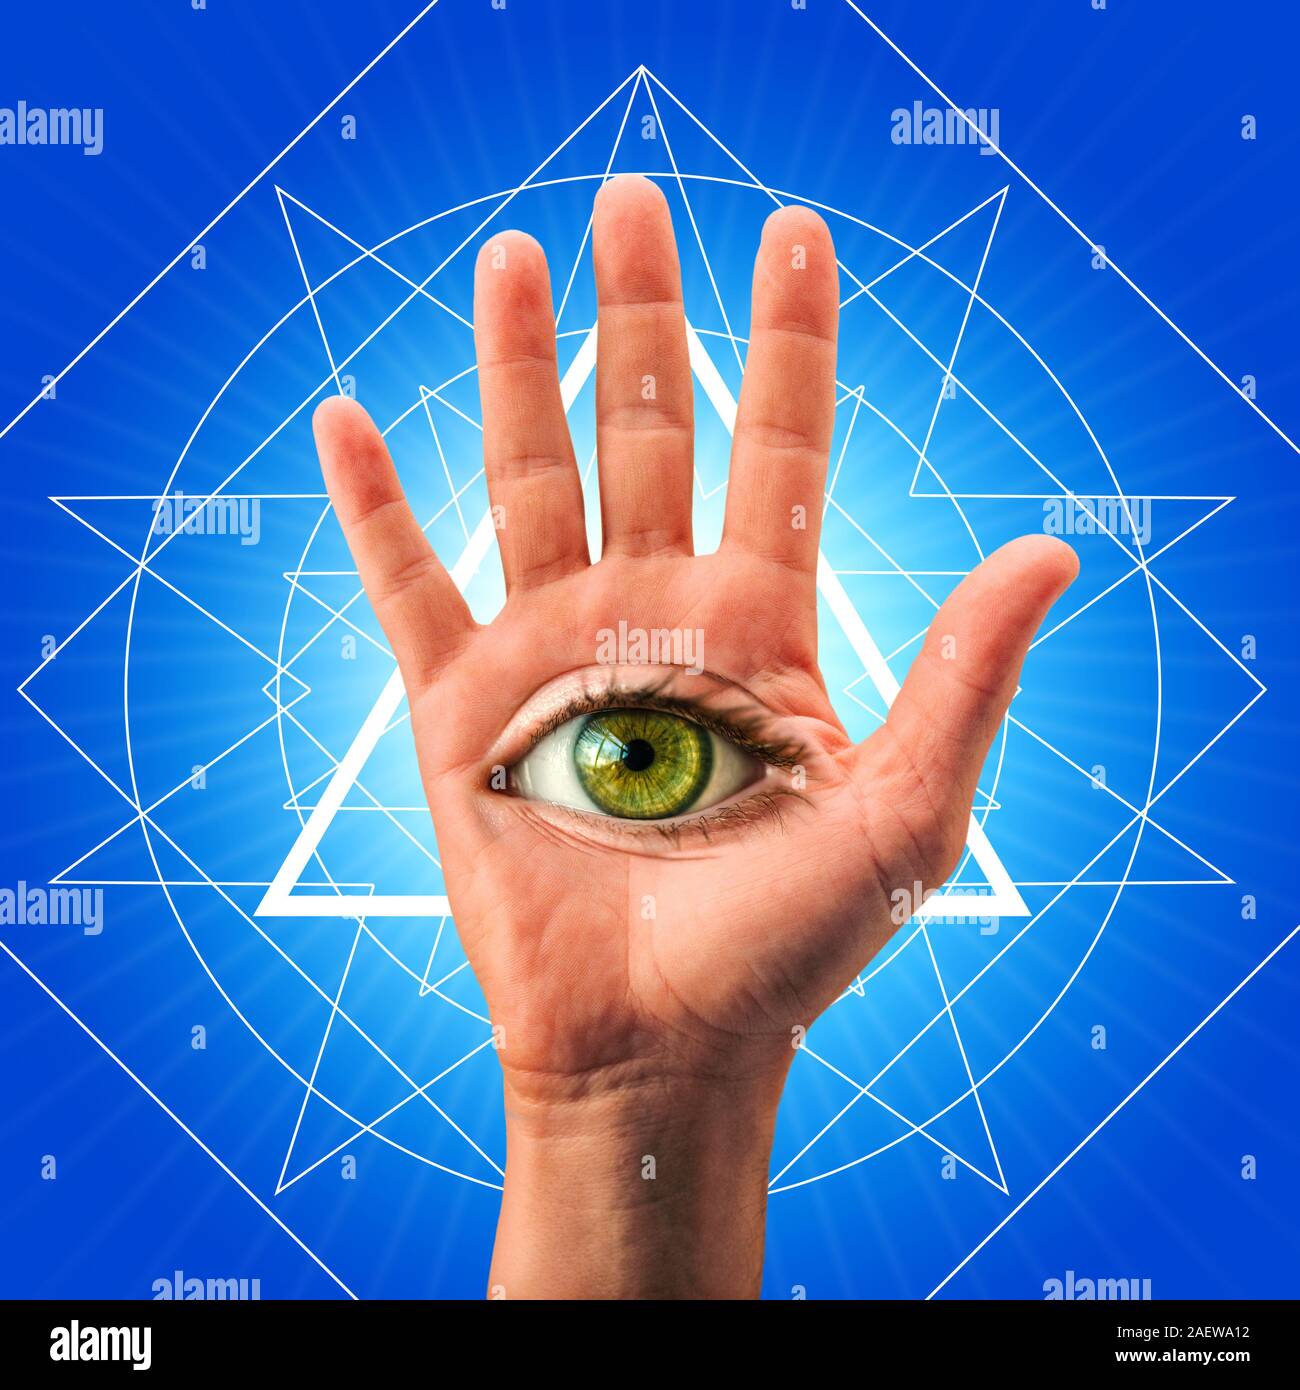 Eye in the palm of the hand. Spiritual symbol concept. Stock Photo